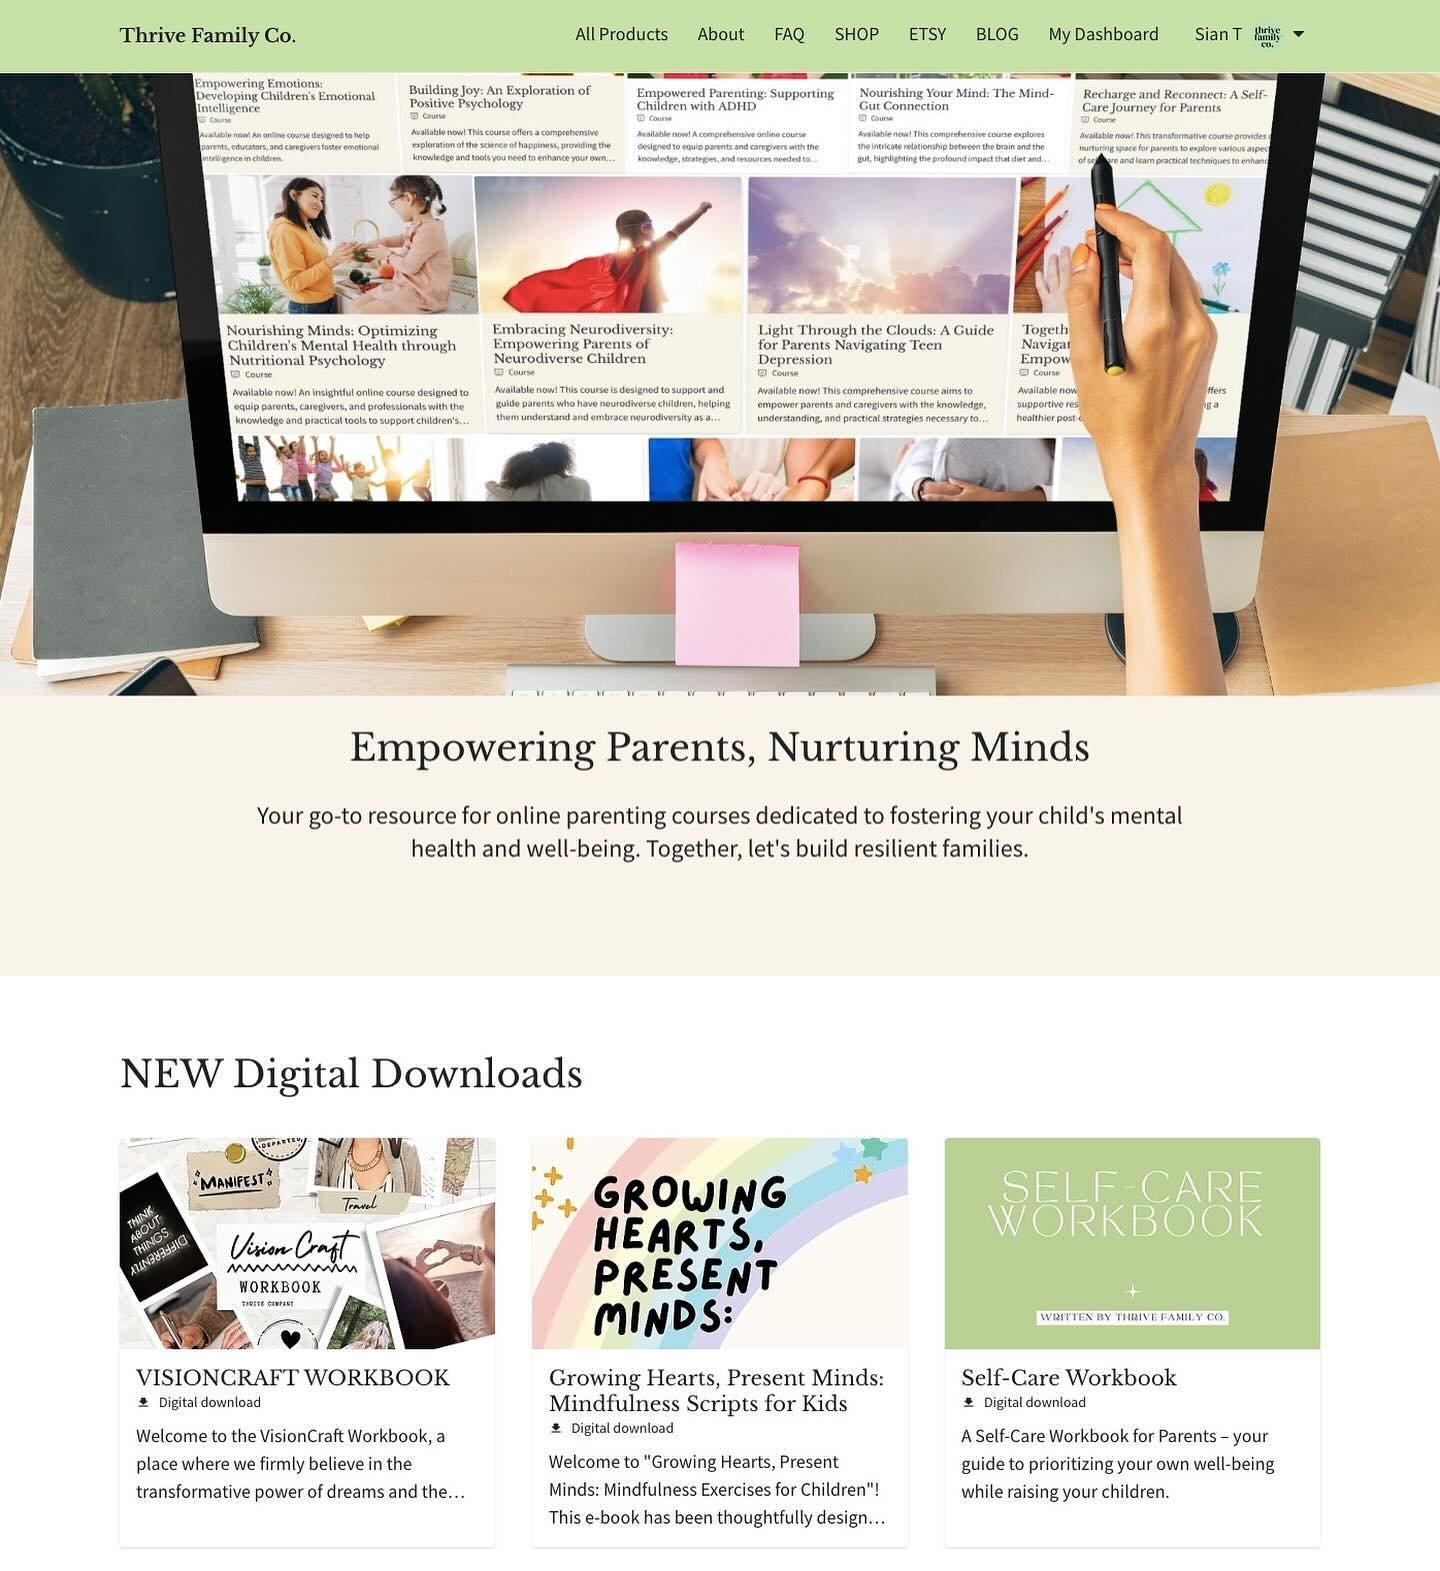 NEW #digitaldownloads available! 🩷 We have completed development of 18 online parenting courses! 💚🌱 @thrivefamilycoursesdotcom www.thrivefamilycourses.com🌱 #kidsmentalhealth #mentalhealth #mentalhealthawareness #childrensmentalhealth #parenting #